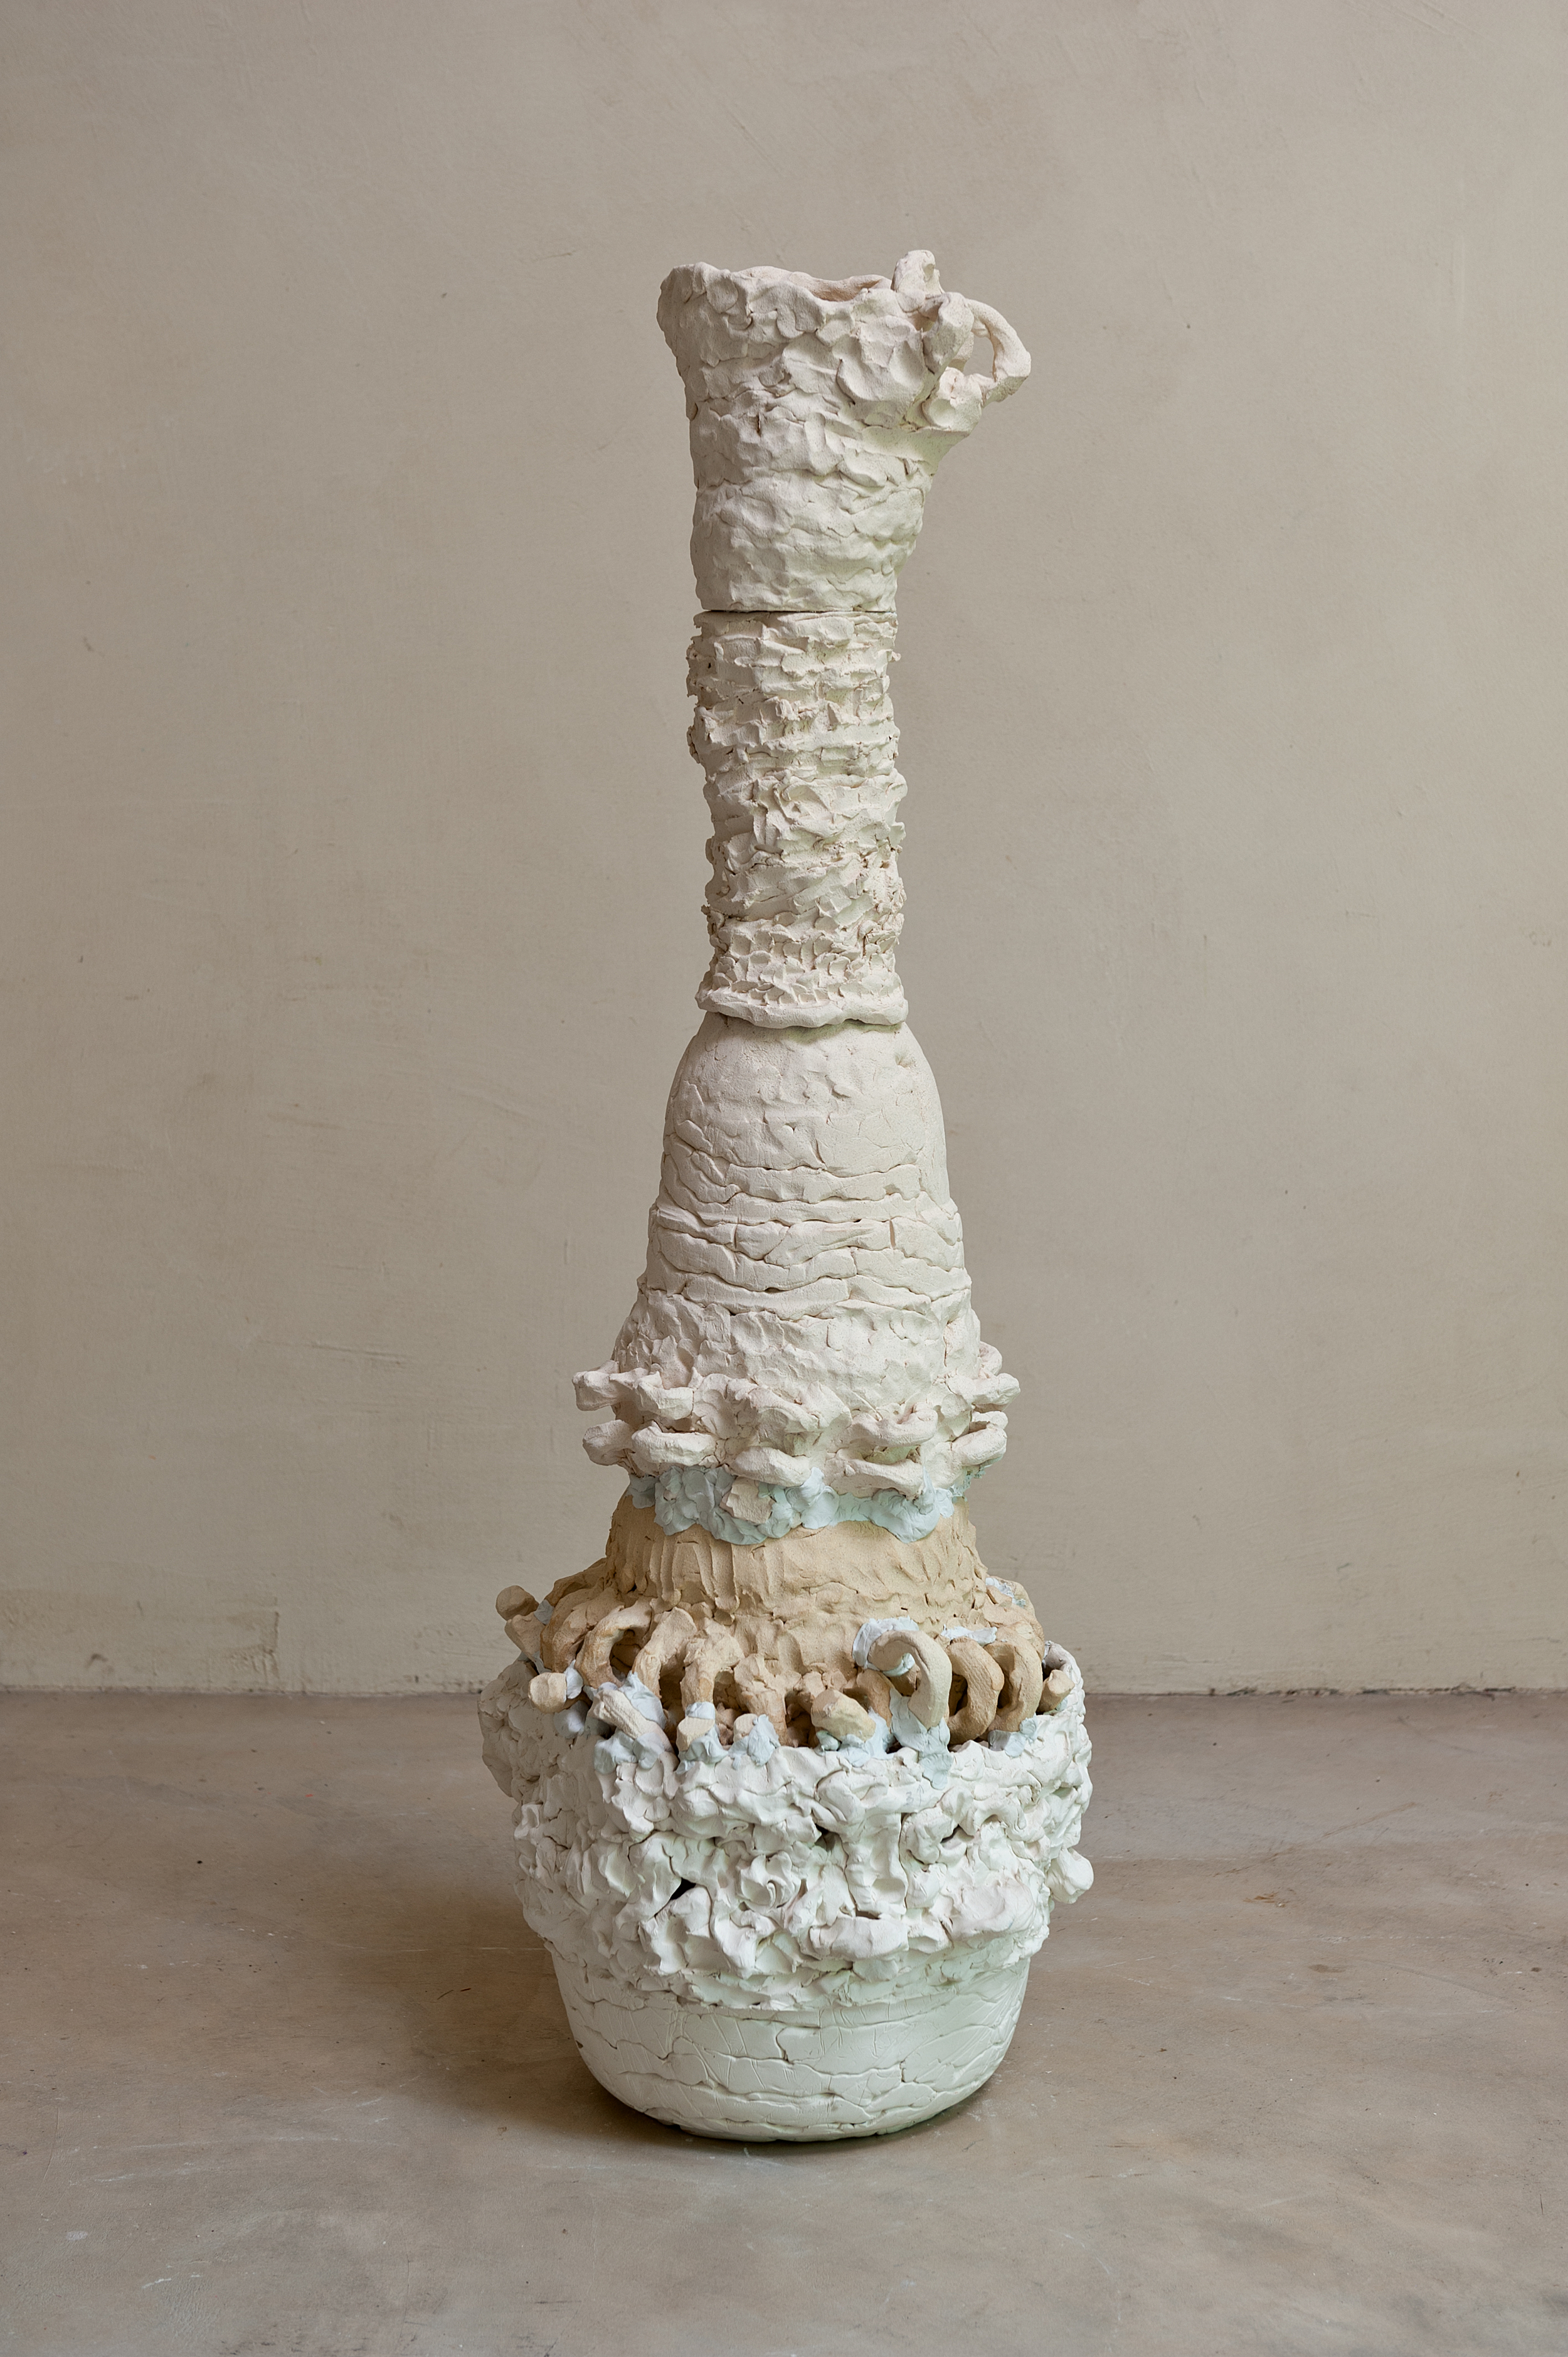  Beverly Semmes,  Stacked Pot#5 , 2015 